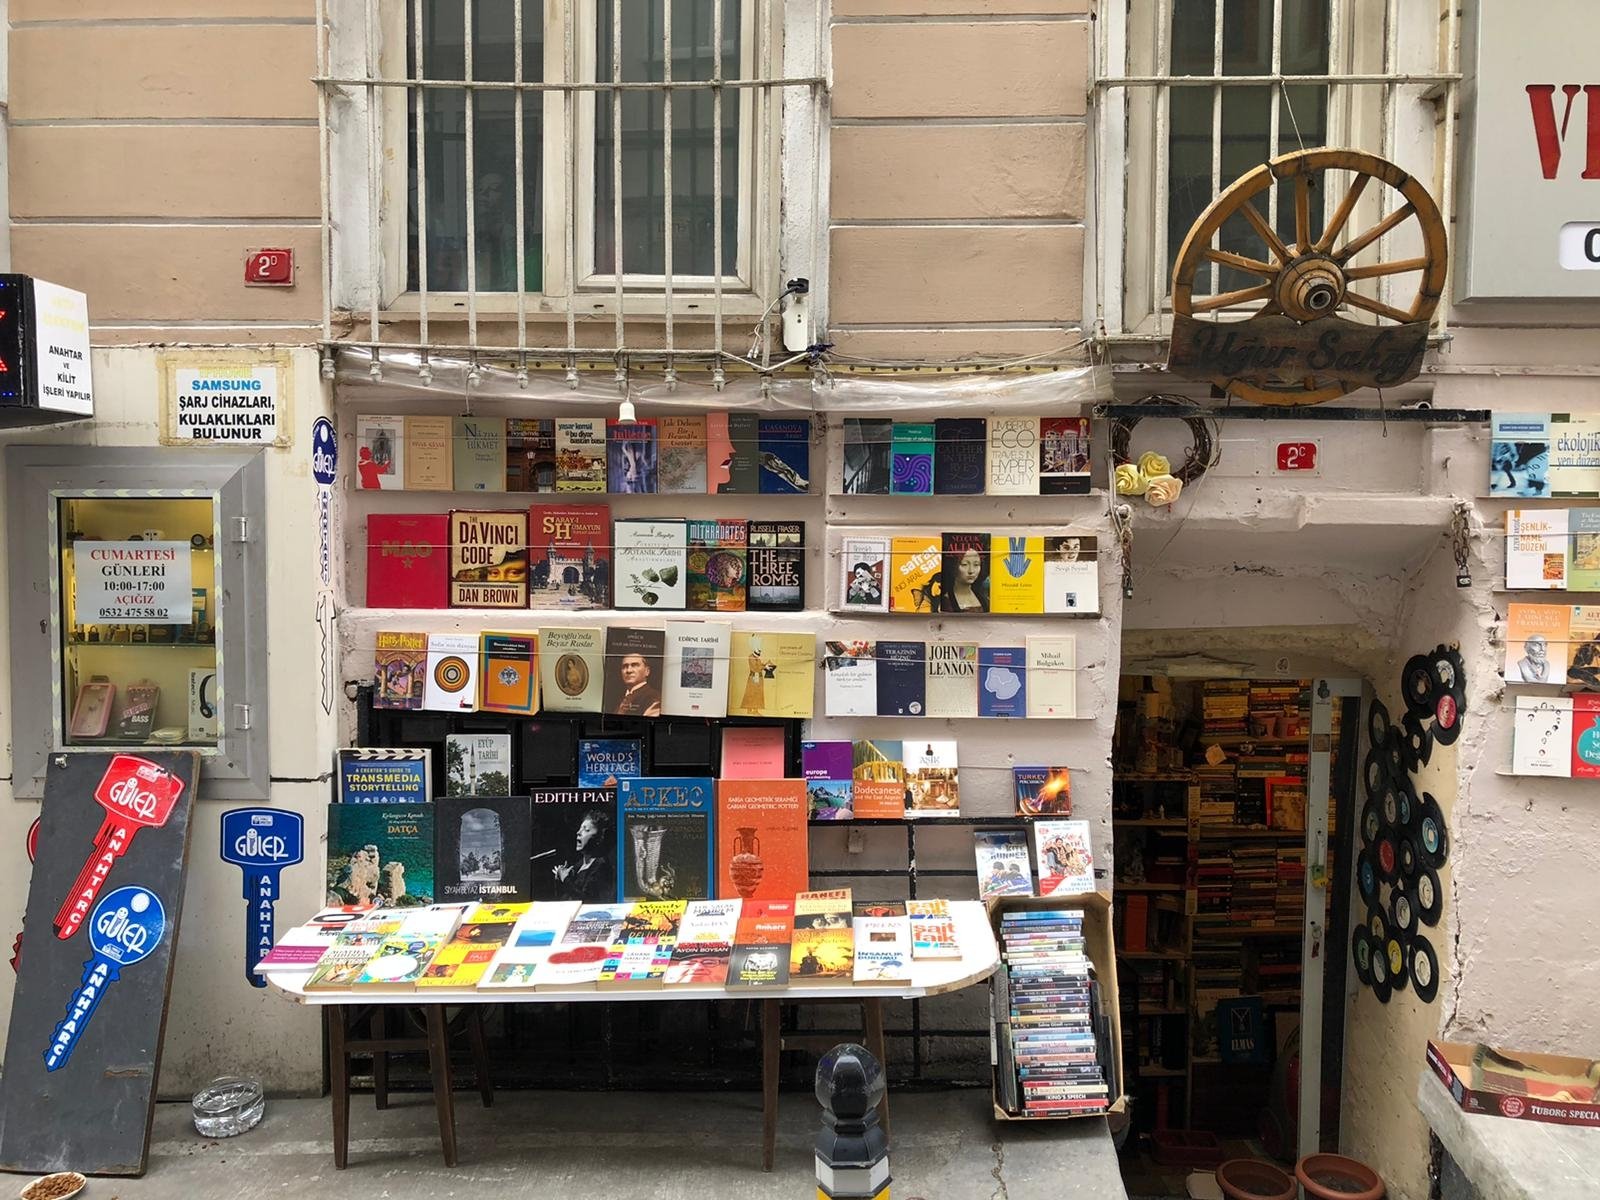 The entrance to the bookstore hangs low, reminiscent of a cellar or basement, Istanbul, Turkey. (Photo by Matt Hanson)